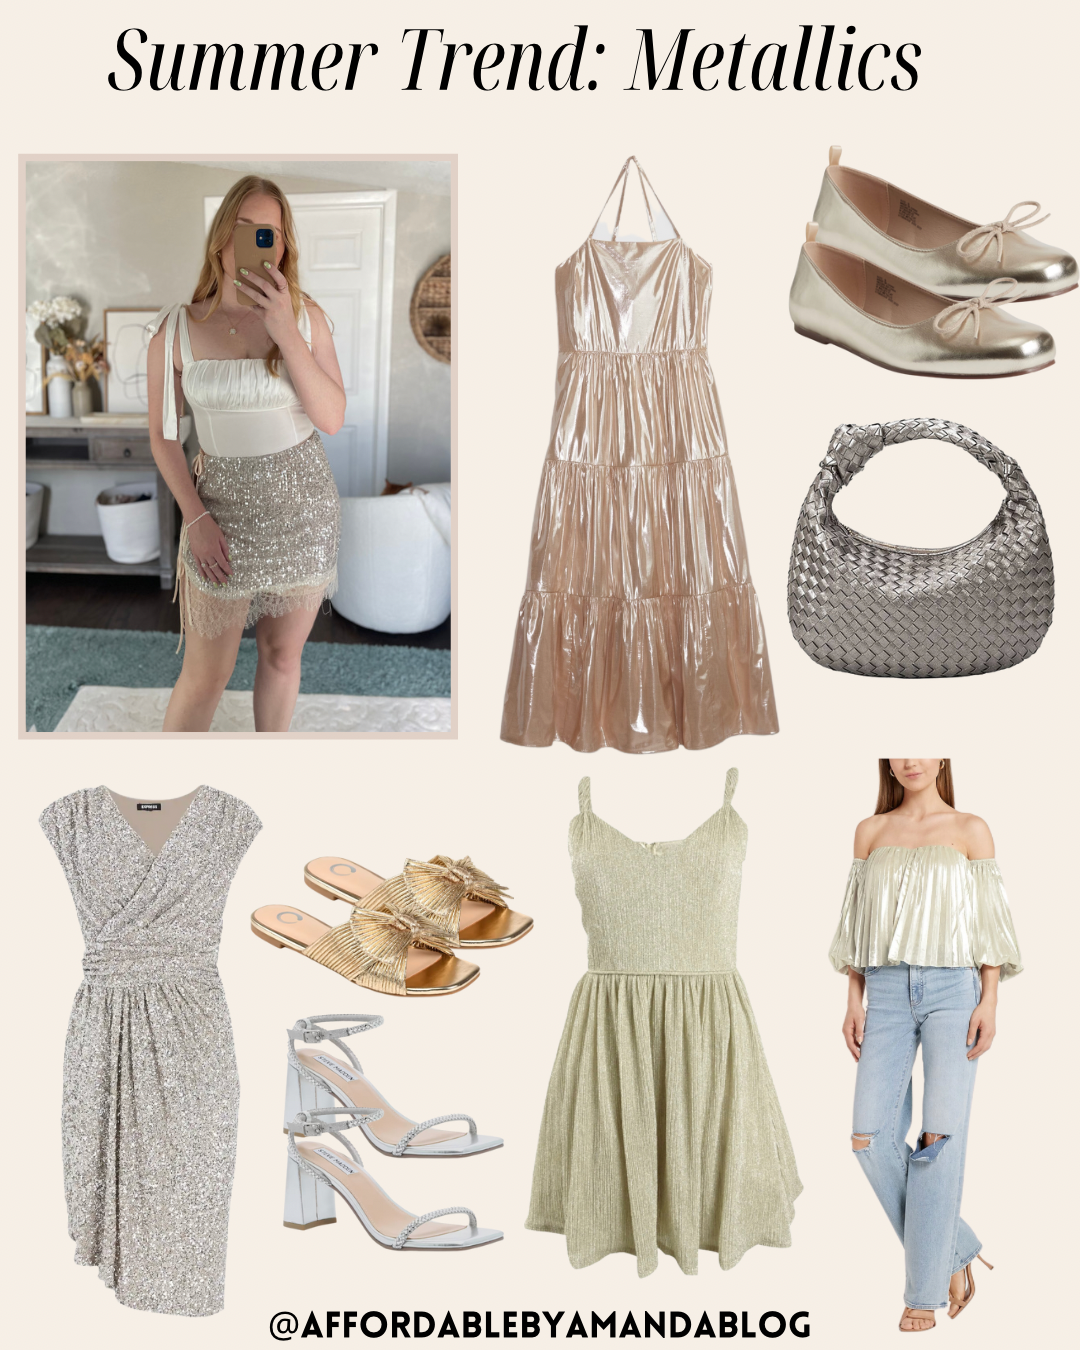 Metallics Are Summer Fashion's Biggest Sleeper Hit. Here's How To Make It  Work For Your Everyday